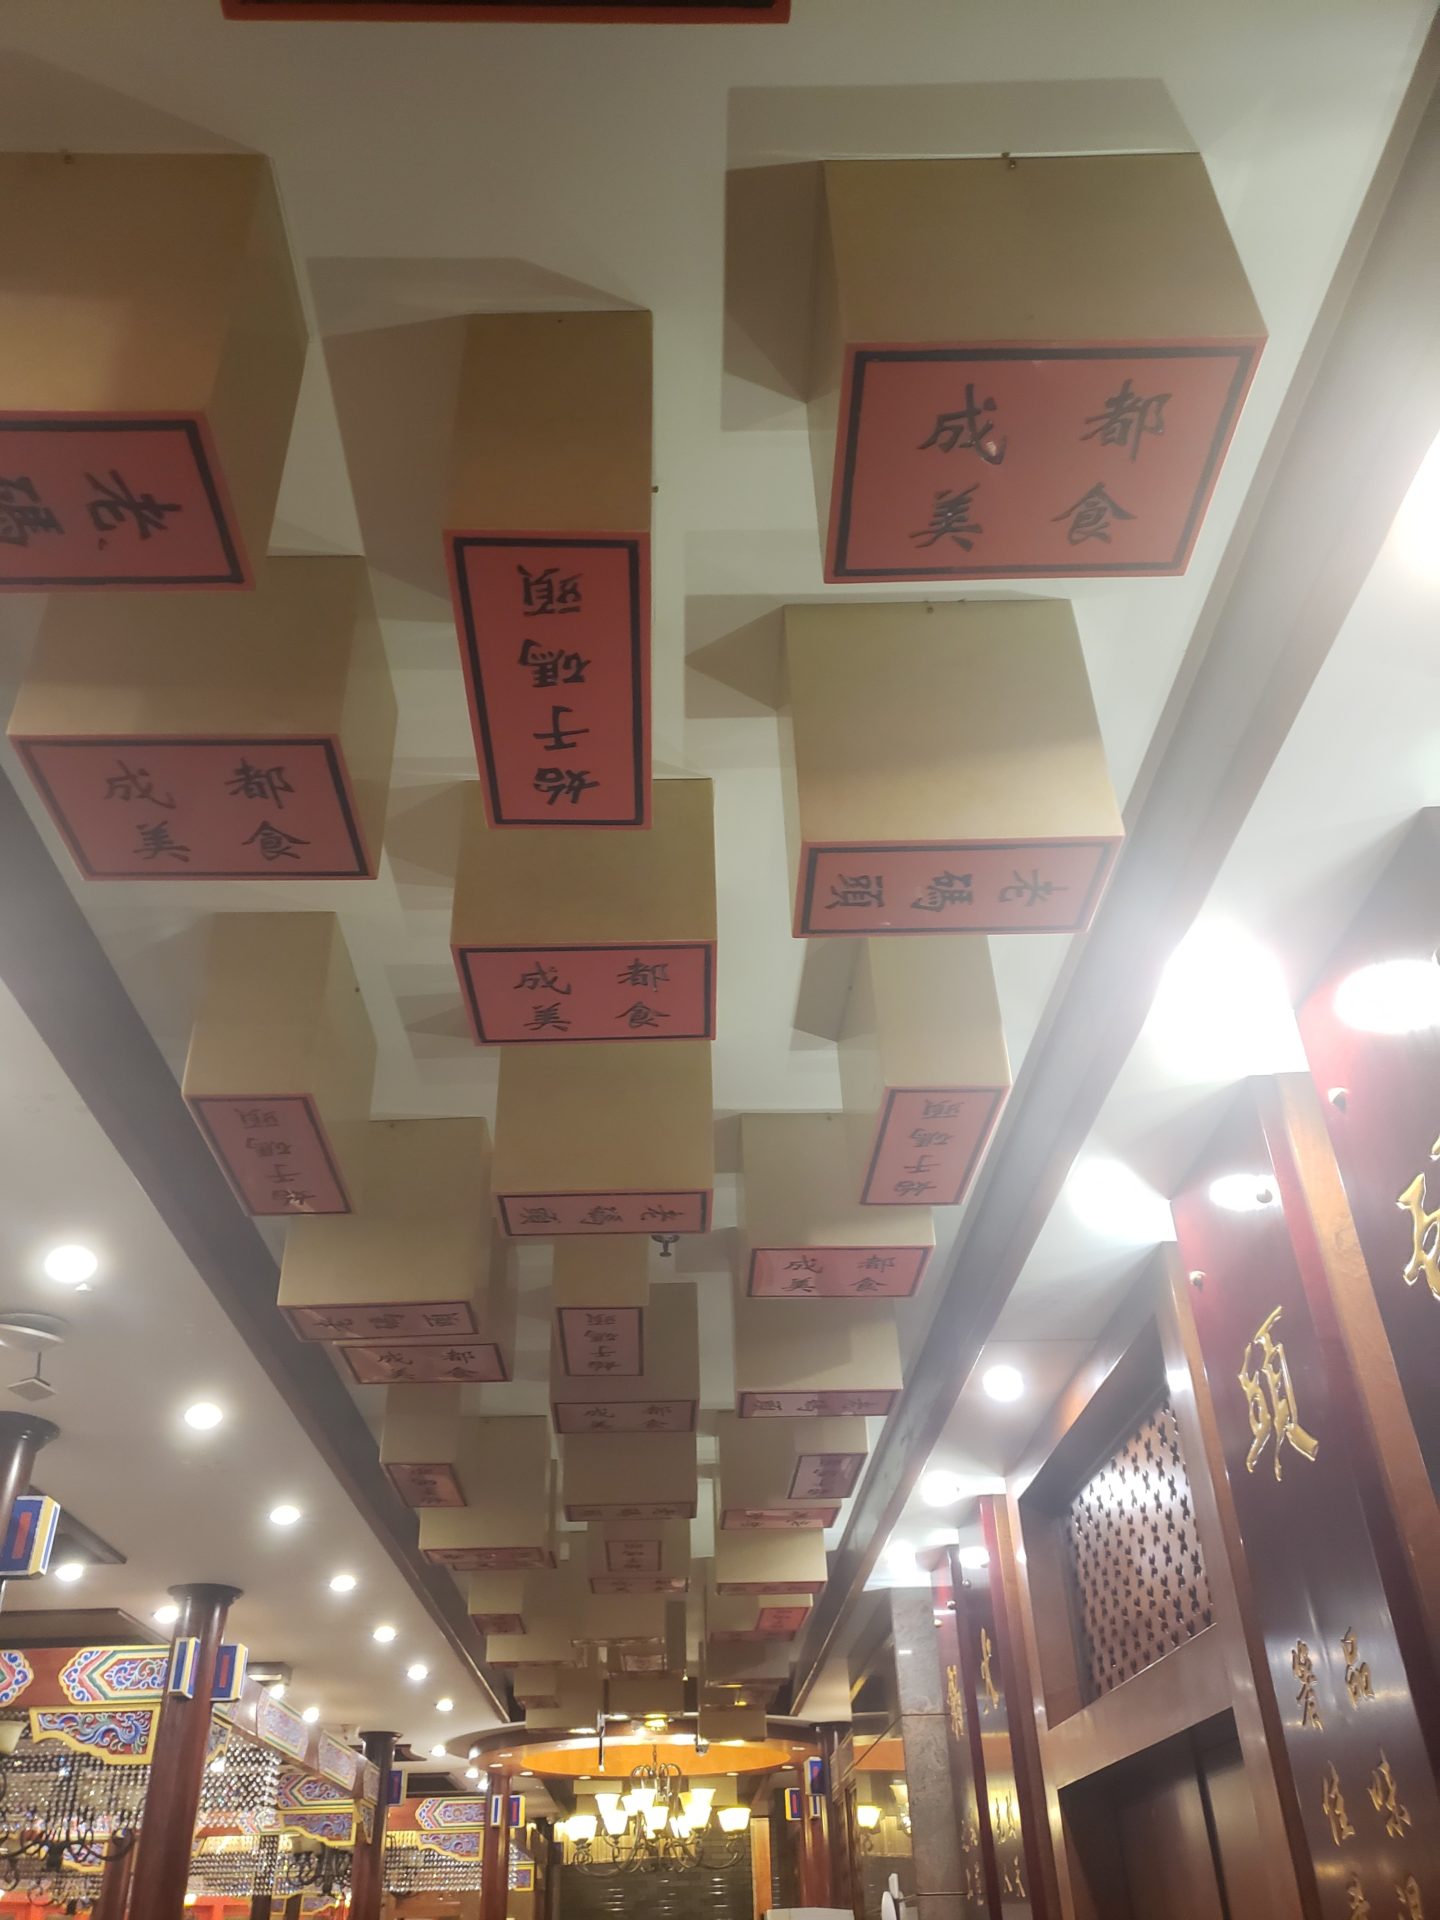 a ceiling with boxes on it